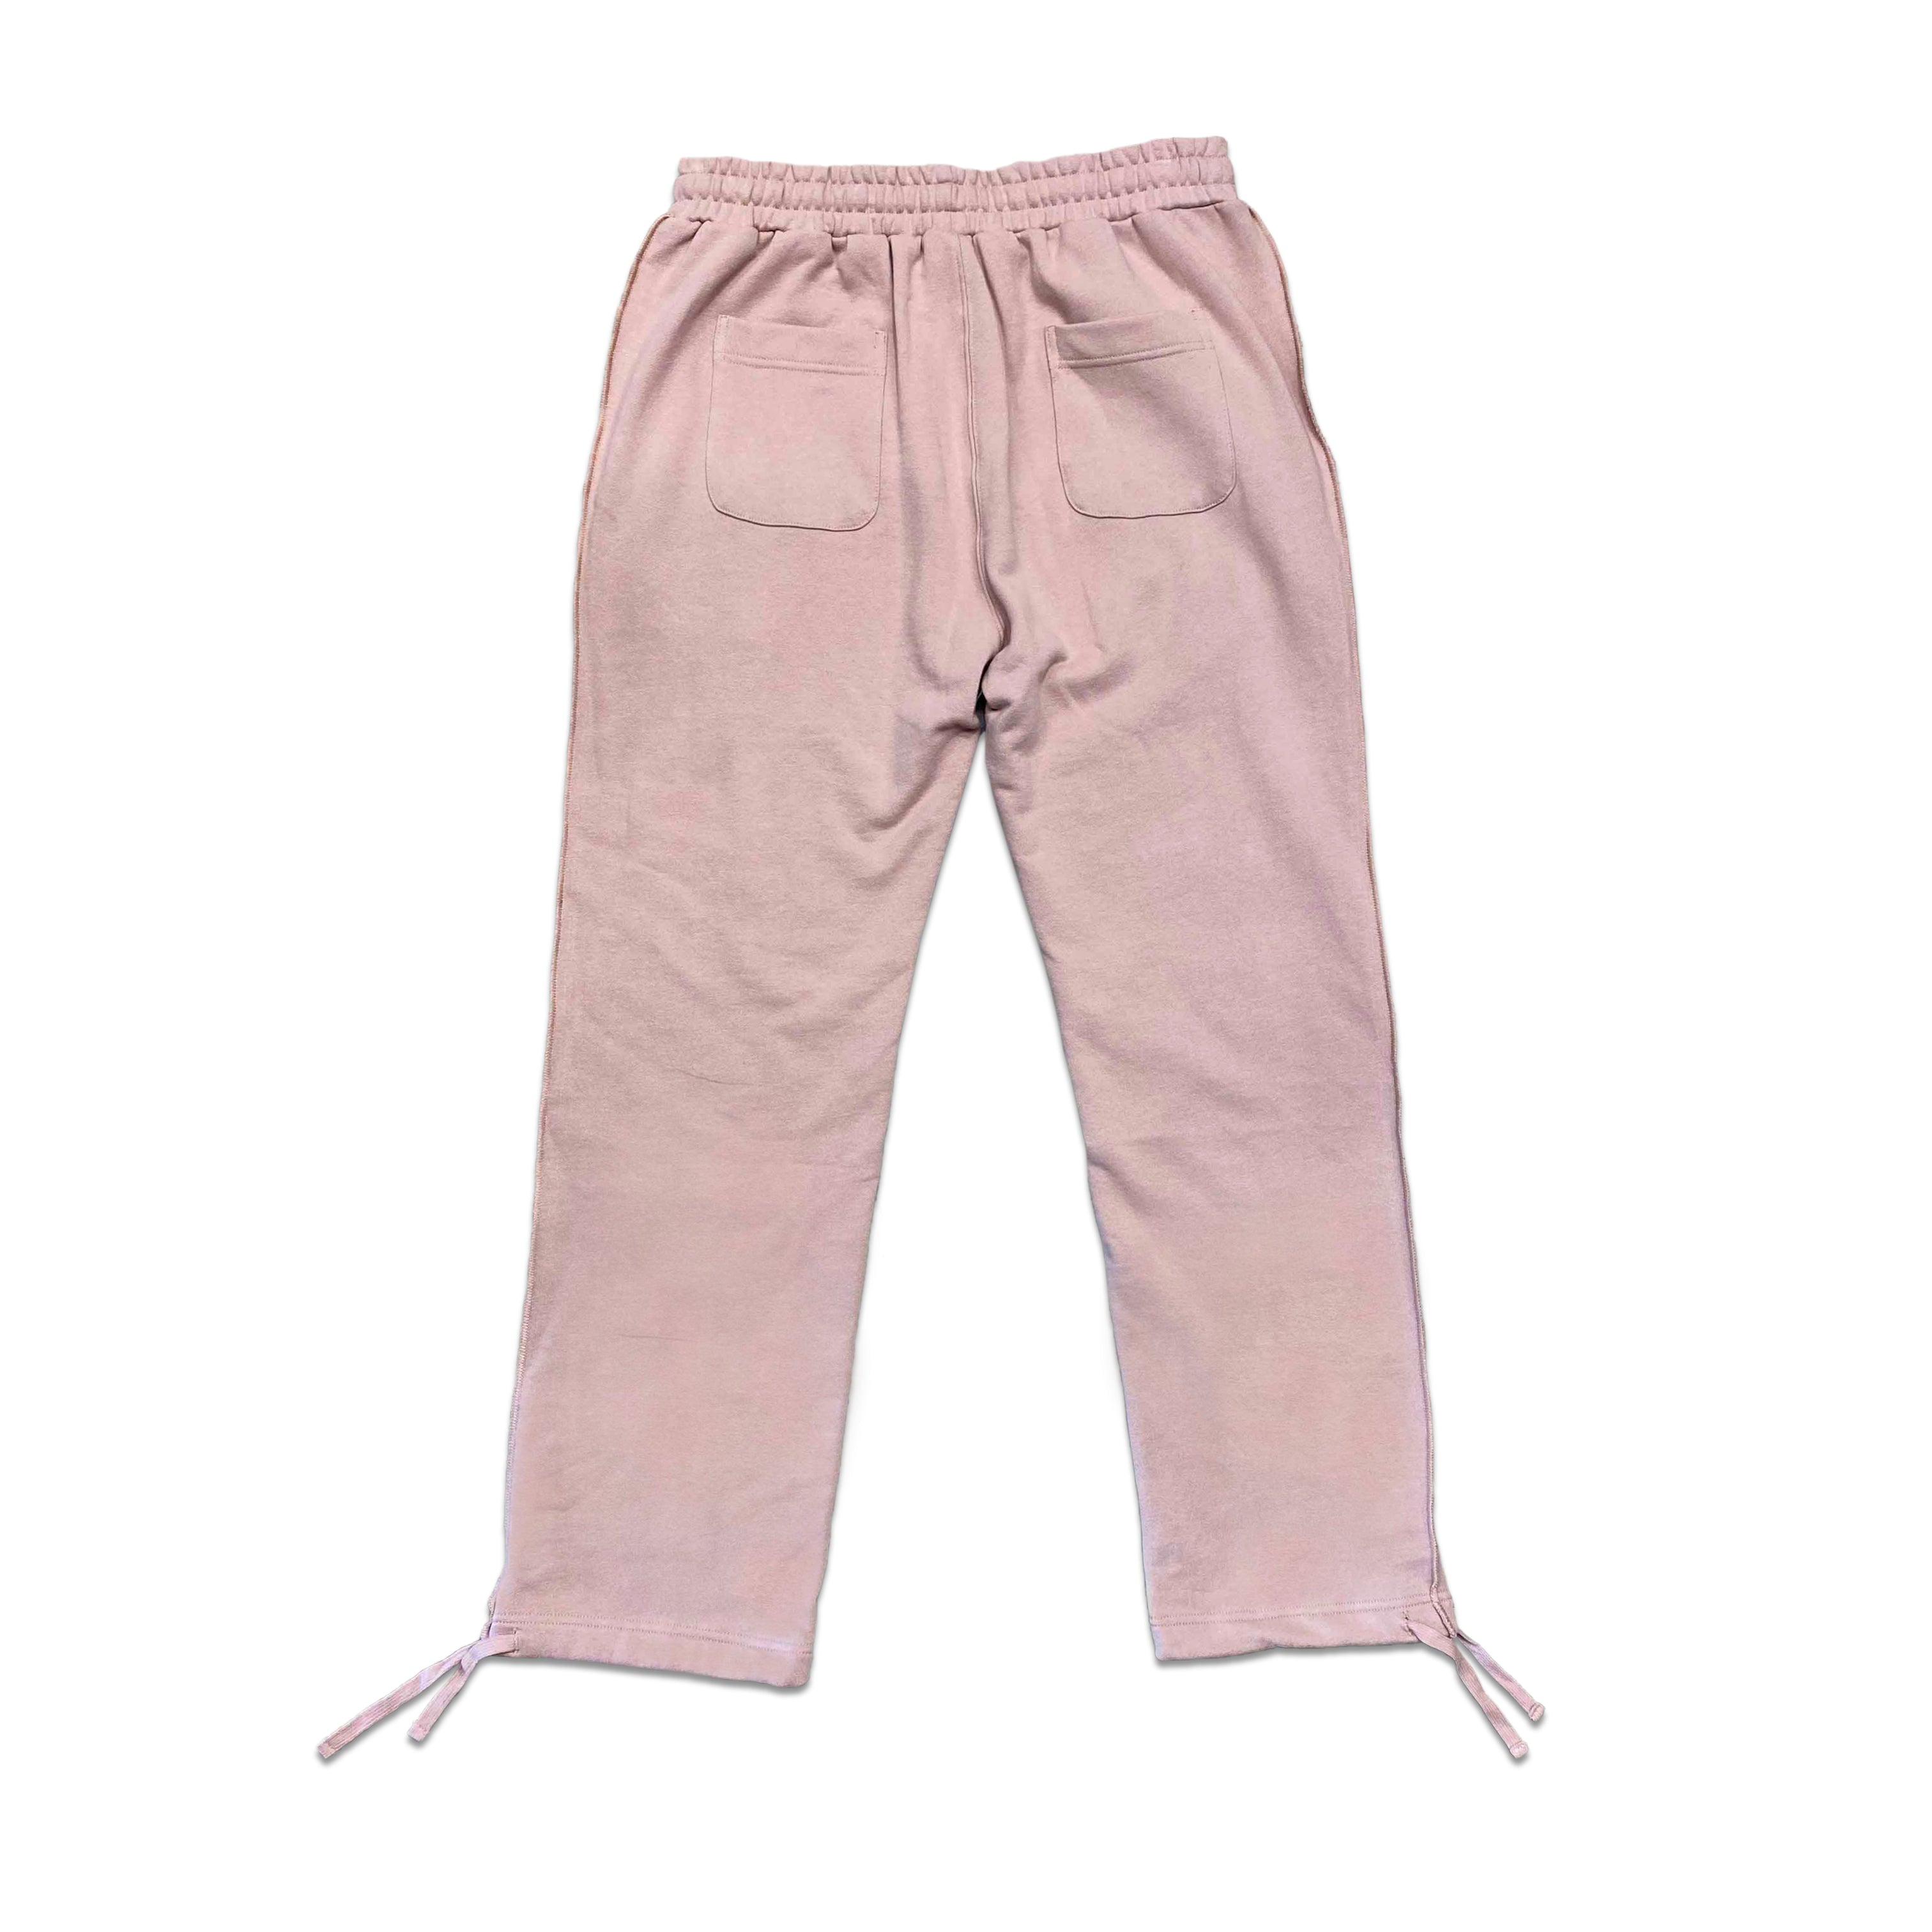 Soled Out Sweatpants Peach New Size S